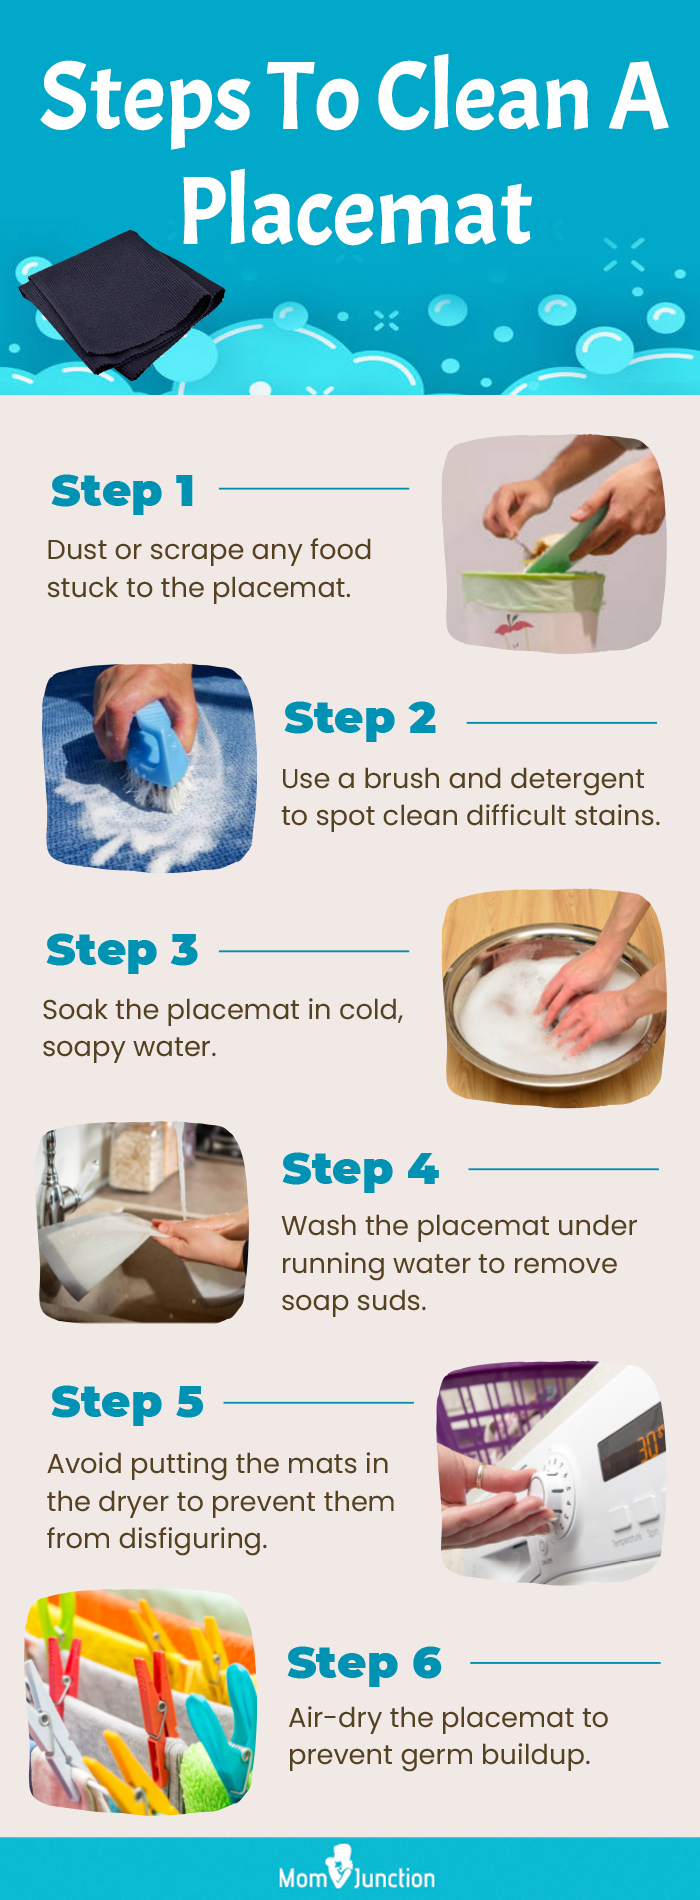 Steps To Clean A Placemat (infographic)